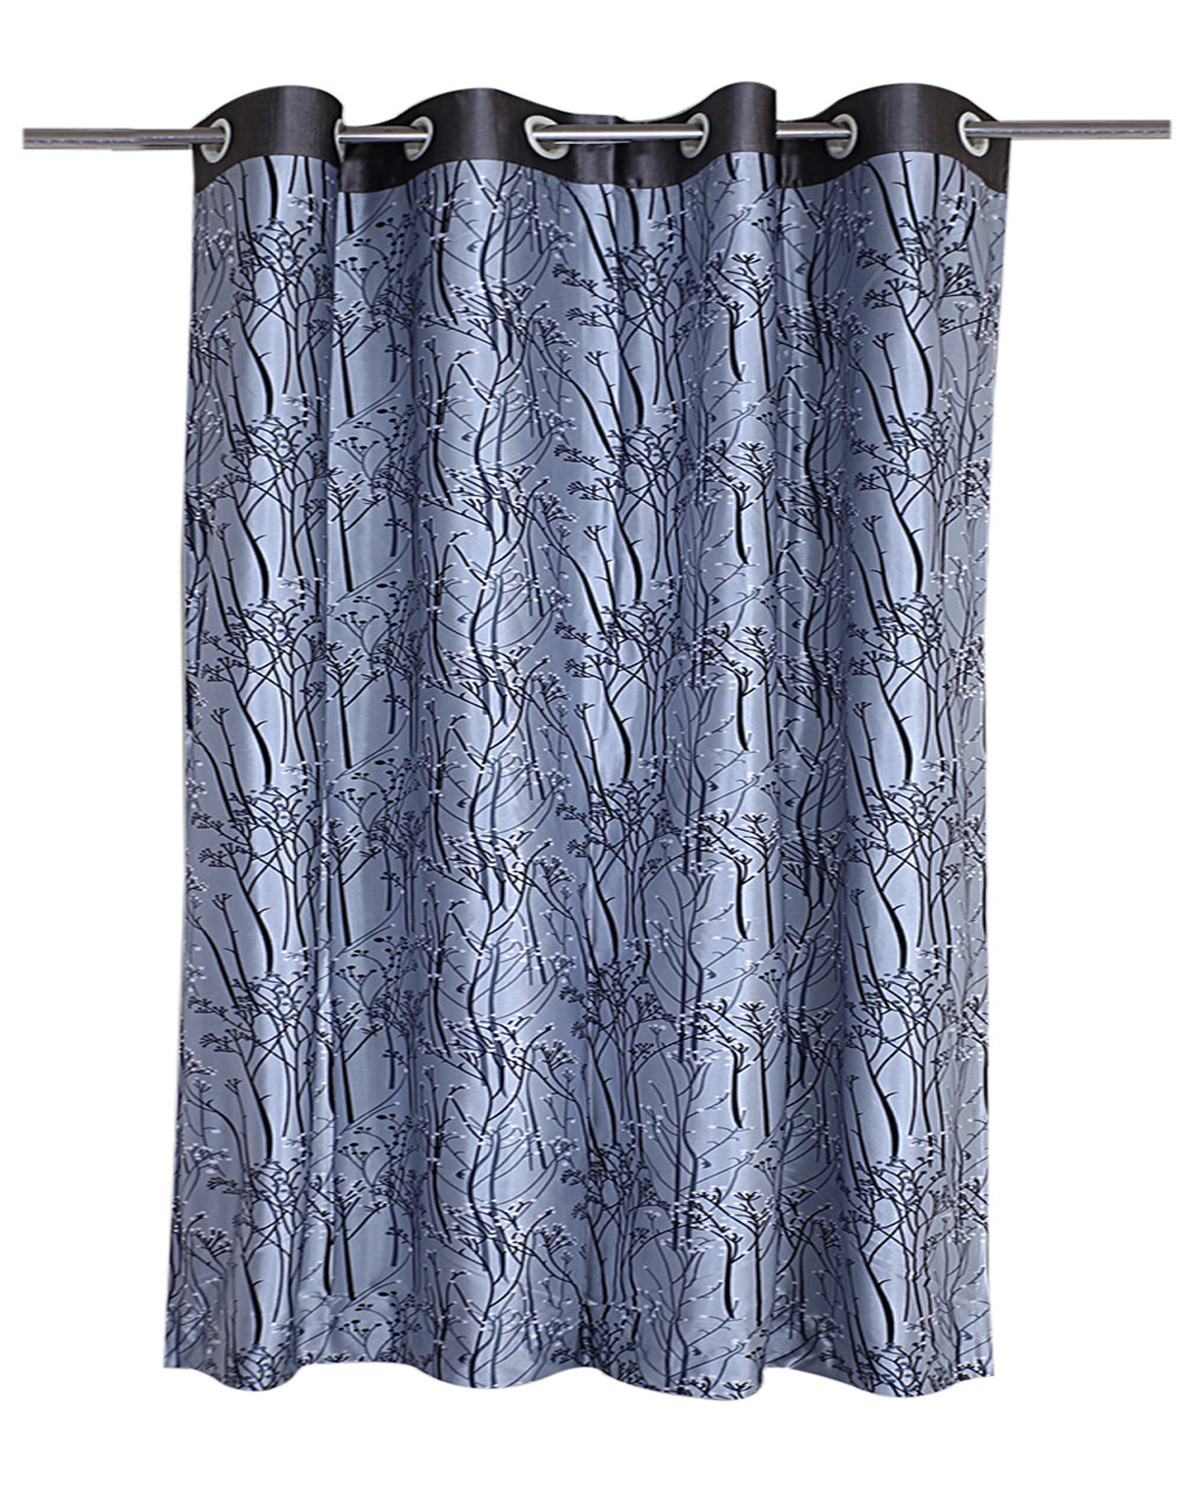 Kuber Industries Polyester Decorative 5 Feet Window Curtain|Tree Branches Print Darkening Blackout|Drapes Curatin With 8 Eyelet For Home & Office (Gray)